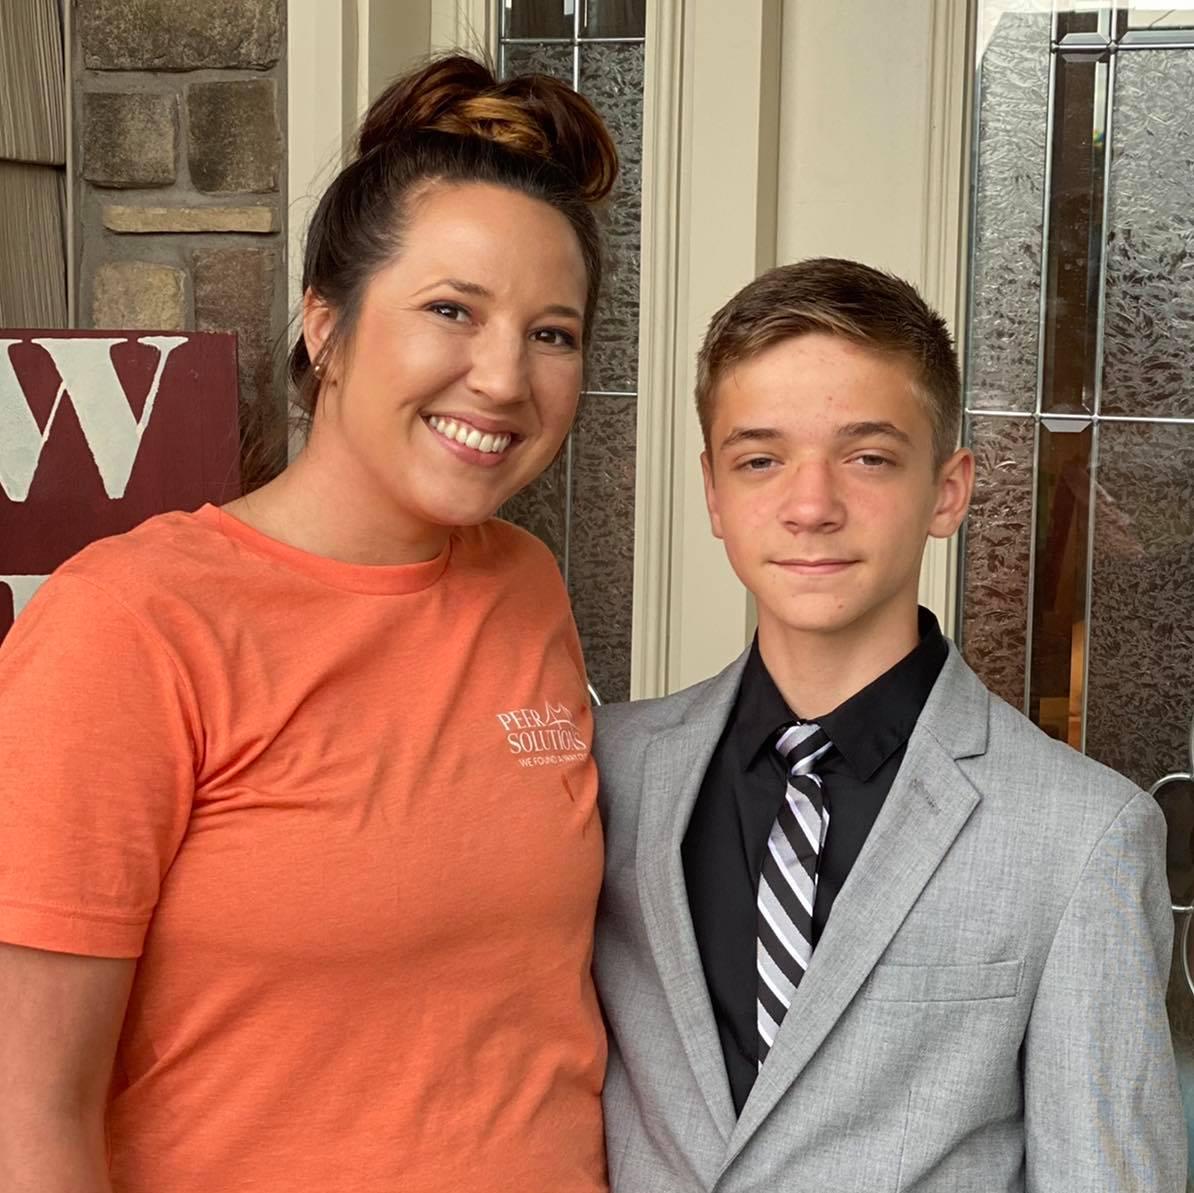 Shay Walters with her 12-year-old son, Tyce. (Courtesy of <a href="https://www.facebook.com/fromprison2purpose/">Shay Walters</a>)